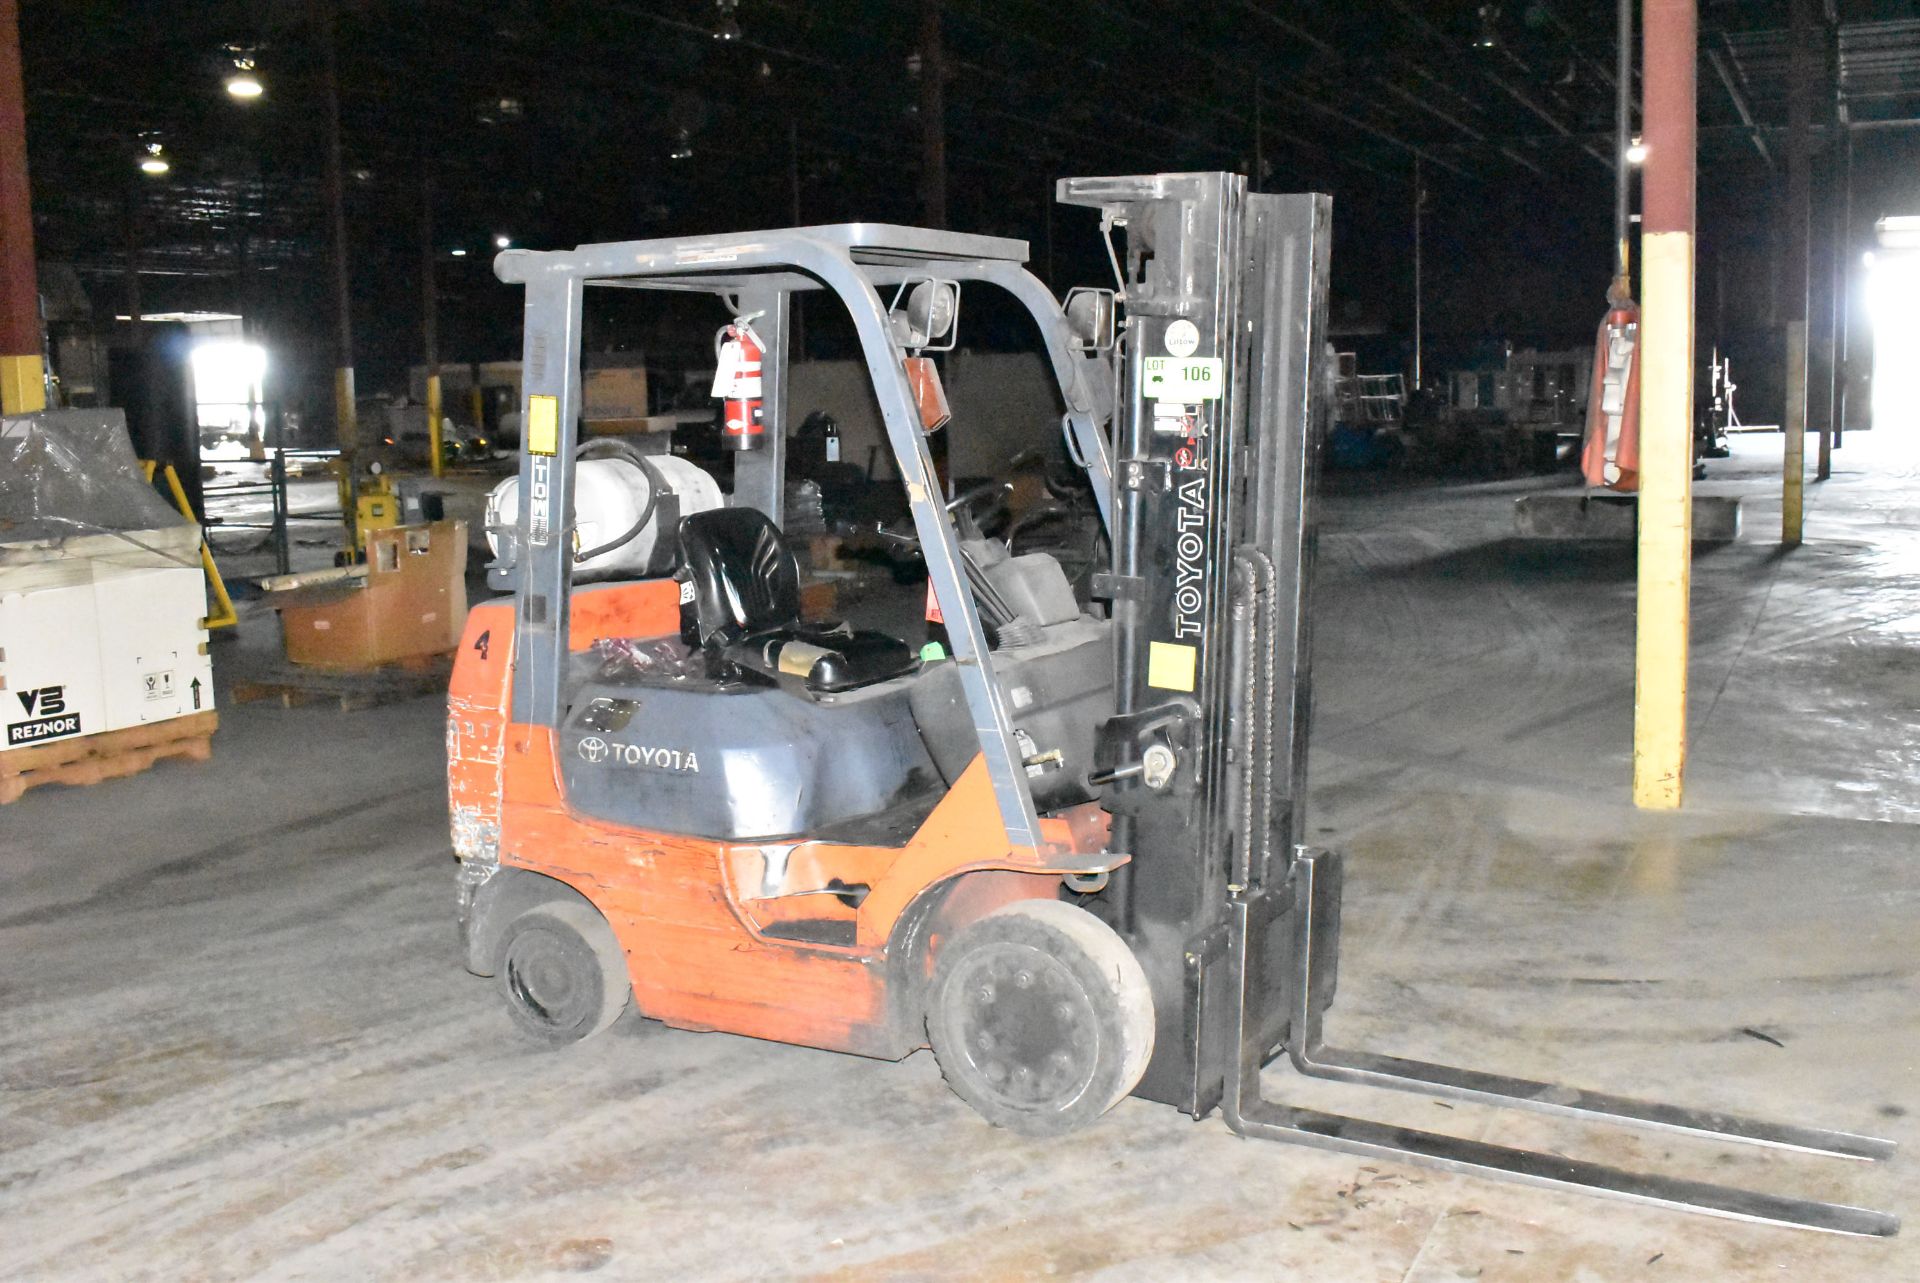 TOYOTA 7FGCU25 5,000LB CAPACITY LPG FORKLIFT WITH 189" MAX VERTICAL REACH, 3-STAGE MAST, SIDE SHIFT,